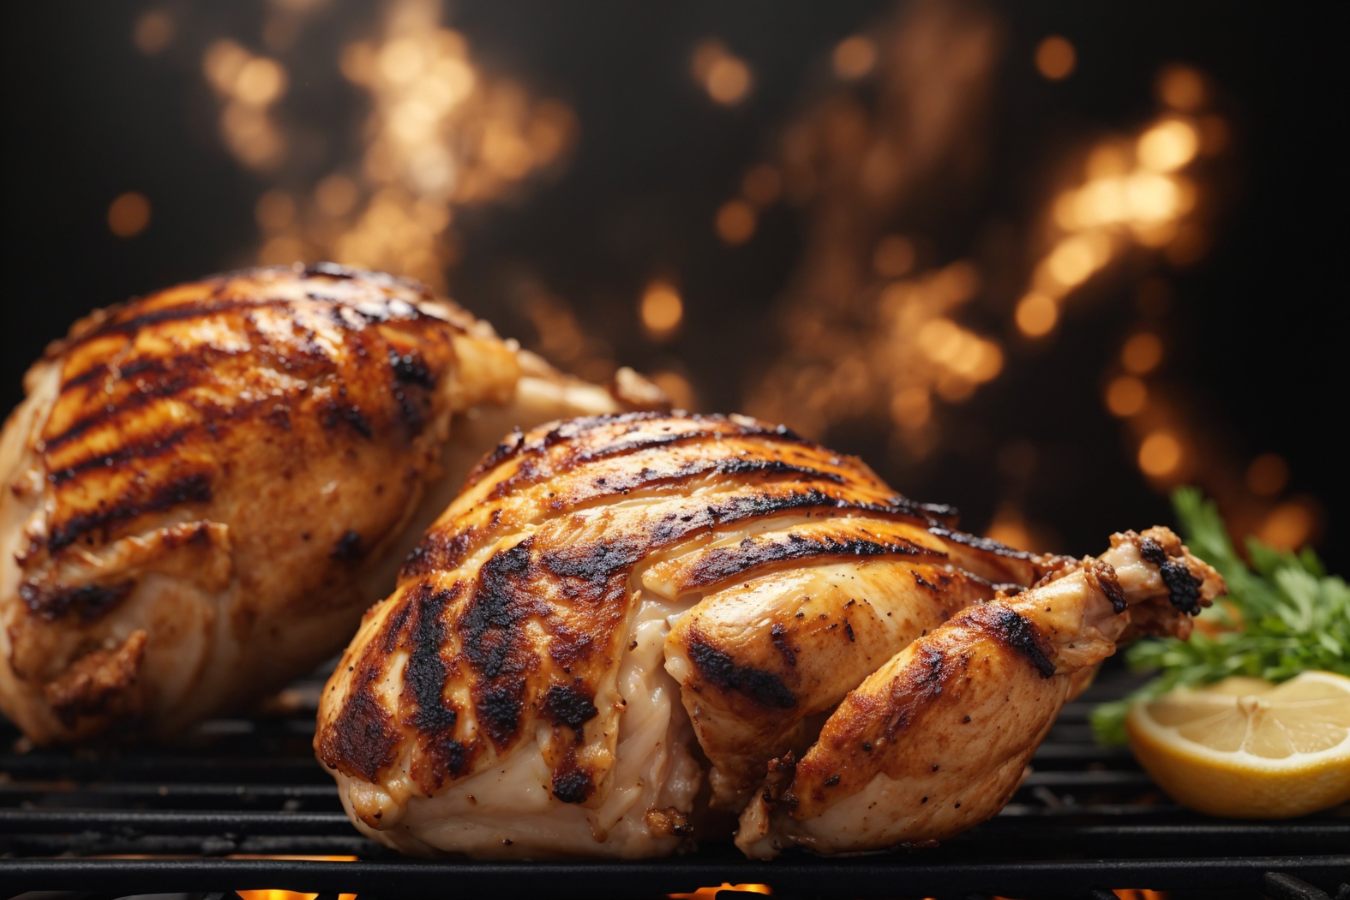 Comparing Skin-on vs Skin-off Grilled Chicken